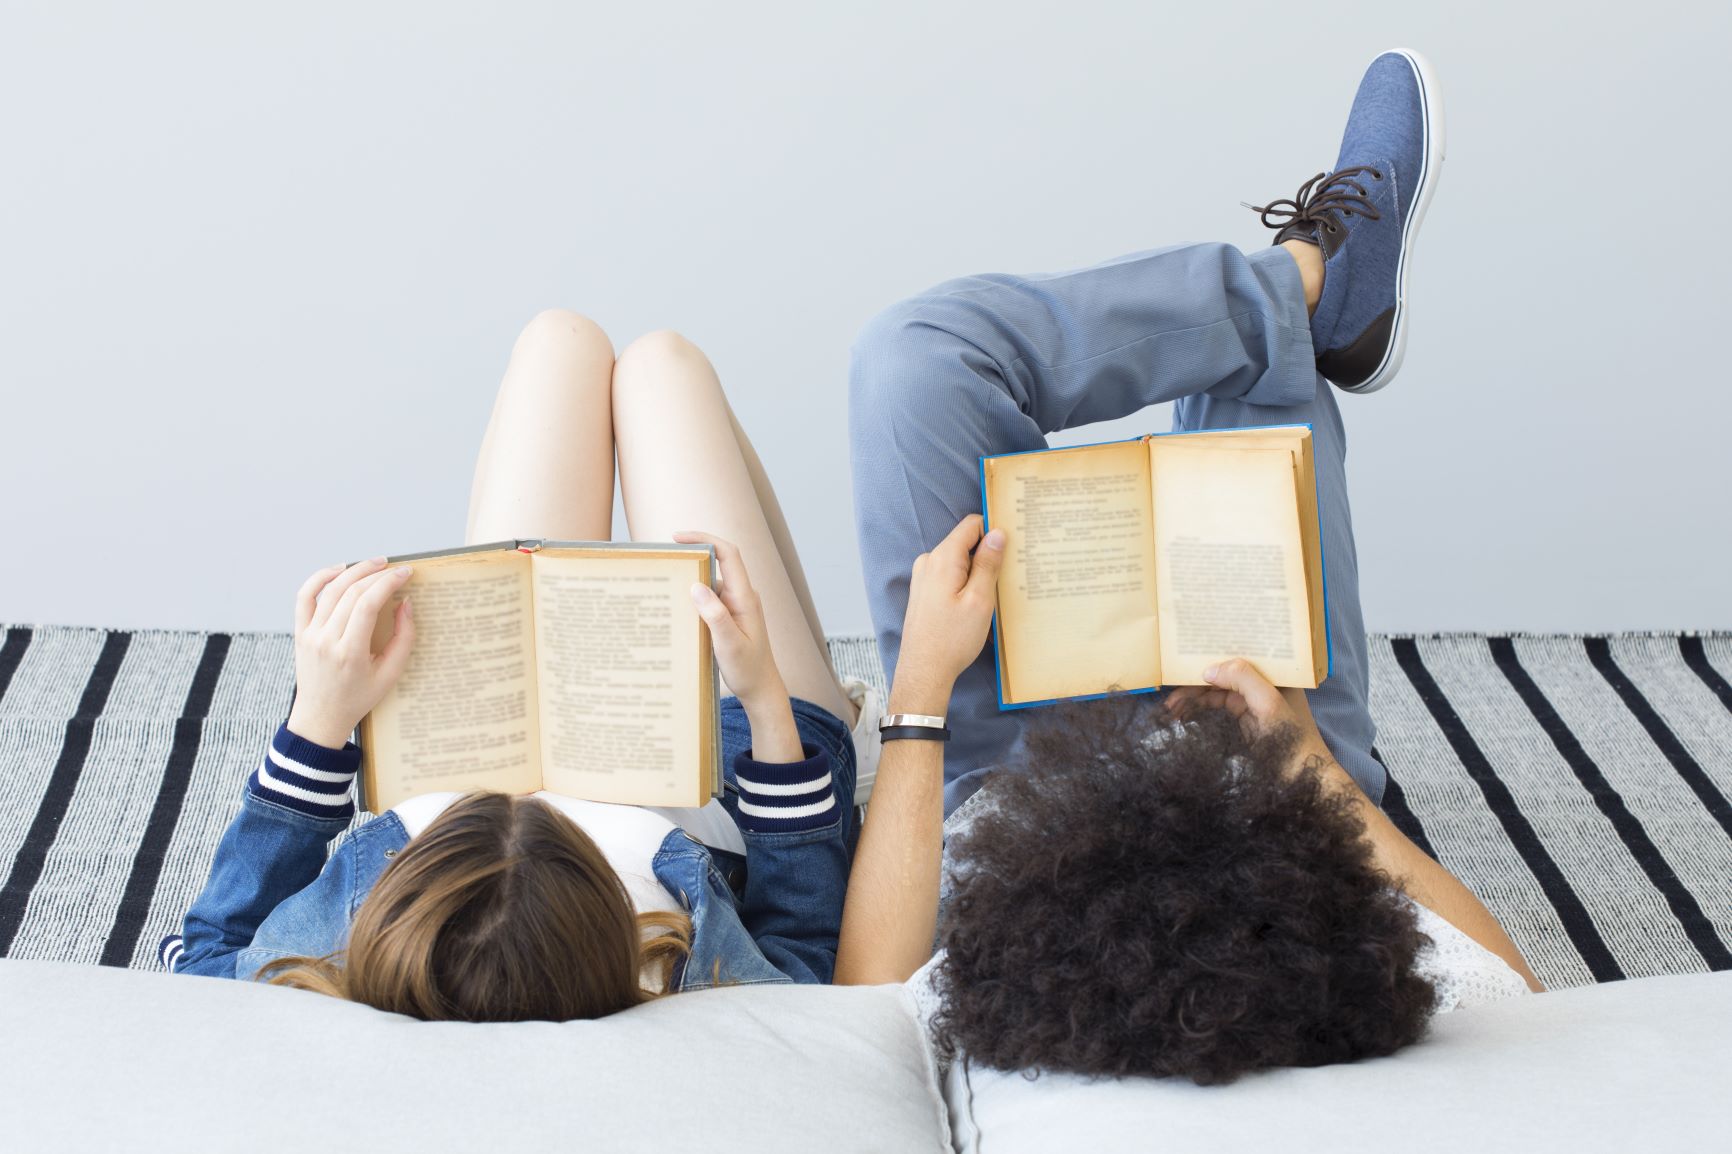 Two people laying in bed reading books